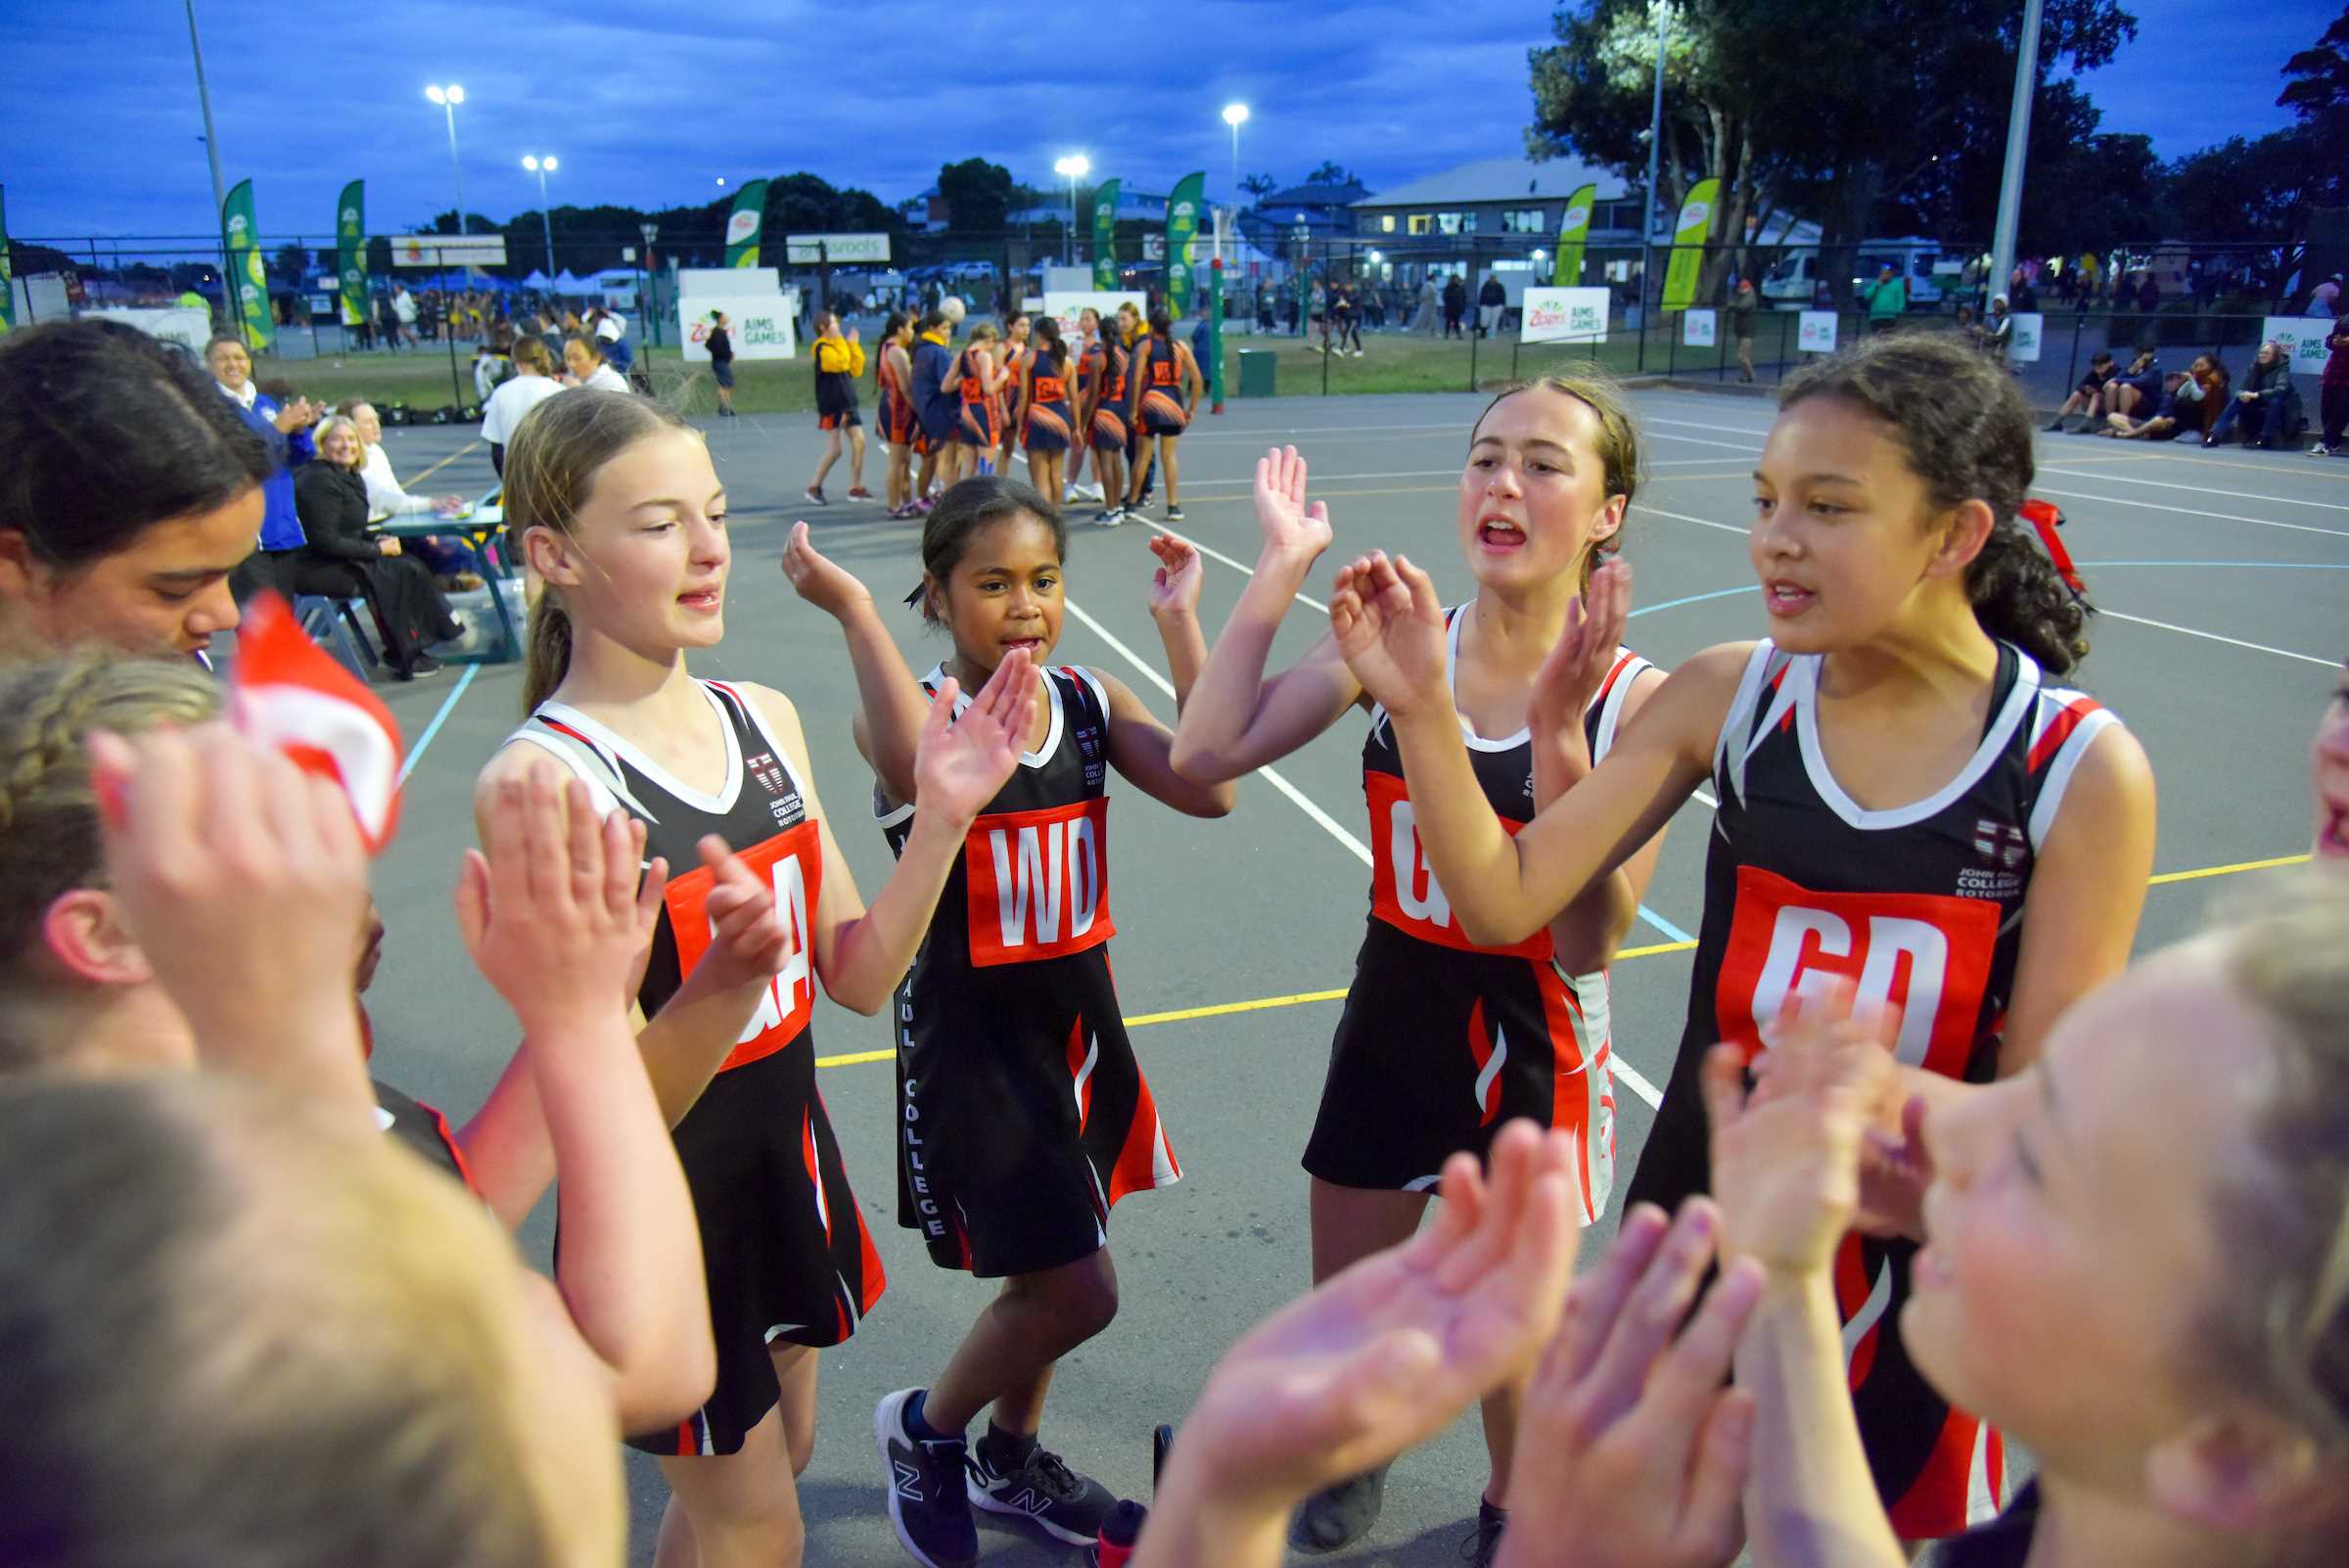 Netball on day four of the 2022 AIMS Games at Blake Park in Mount Maunganui, New Zealand on Wednesday, 7 September 2022. Photo: Dave Lintott / lintottphoto.co.nz